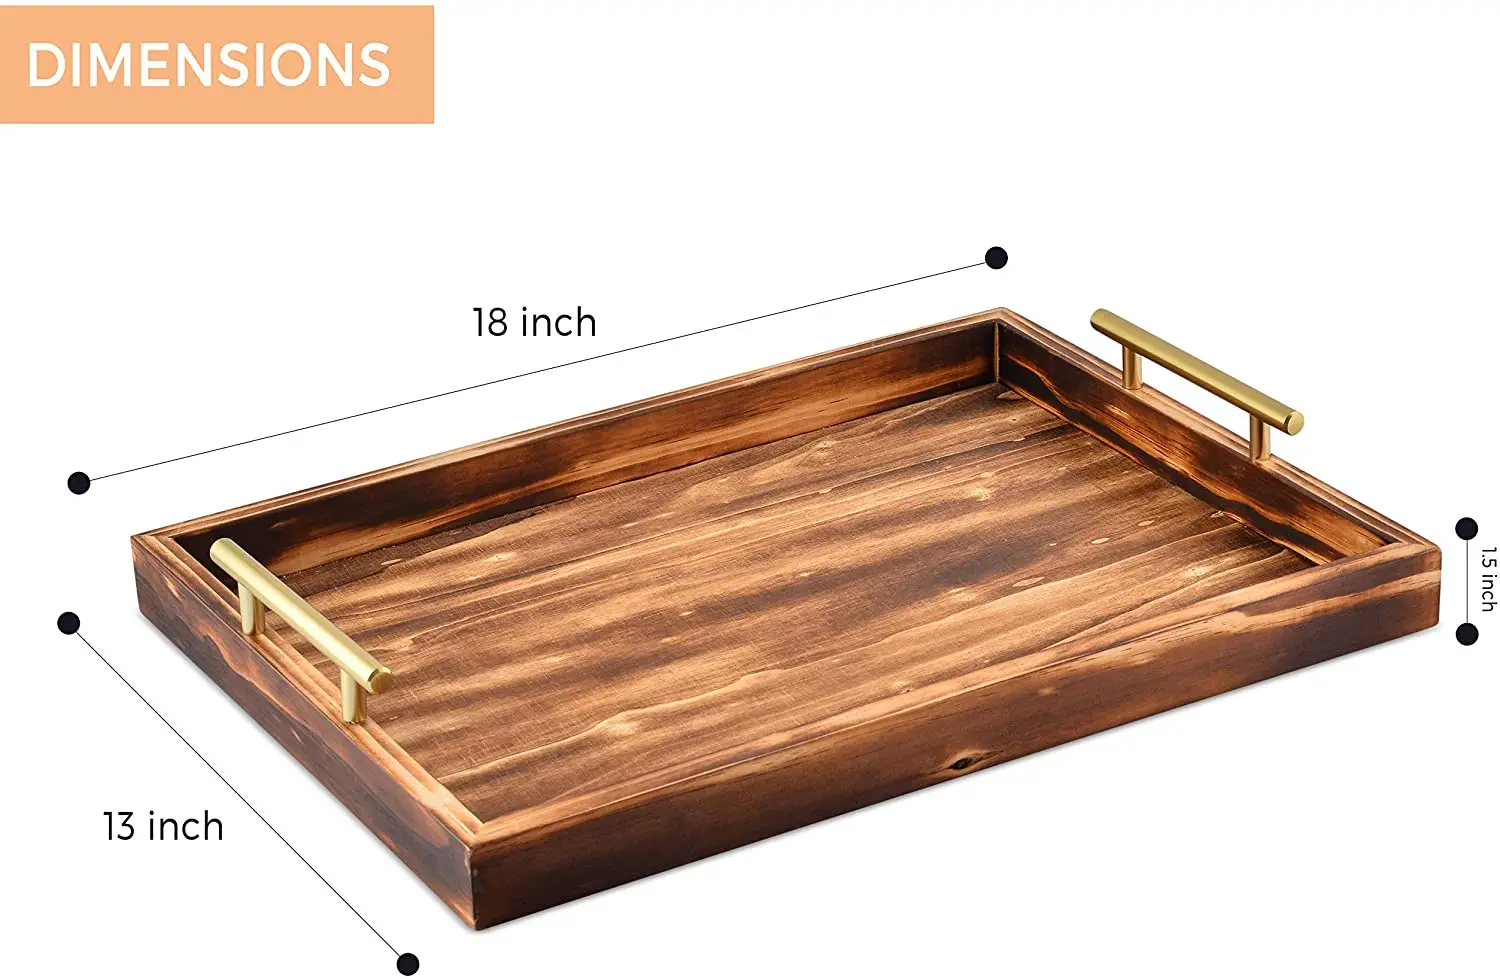 Large Wooden Serving Tray Coffee Table Wood Tray For Ottoman - Buy ...